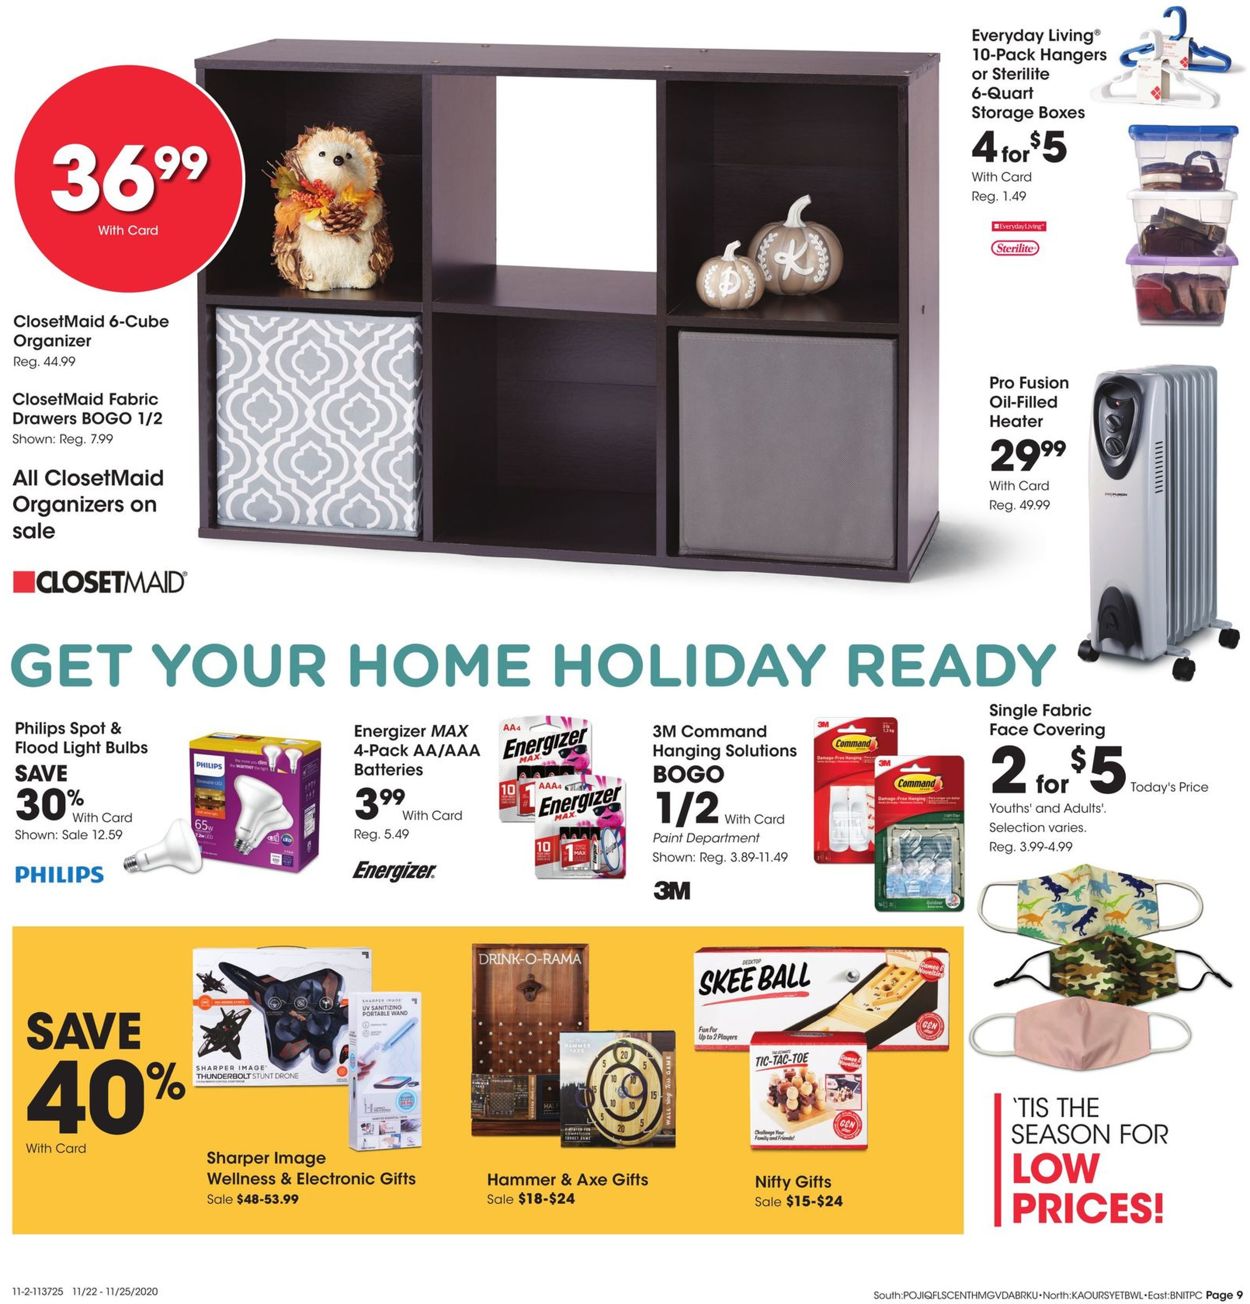 Catalogue Fred Meyer Black Friday 2020 from 11/22/2020